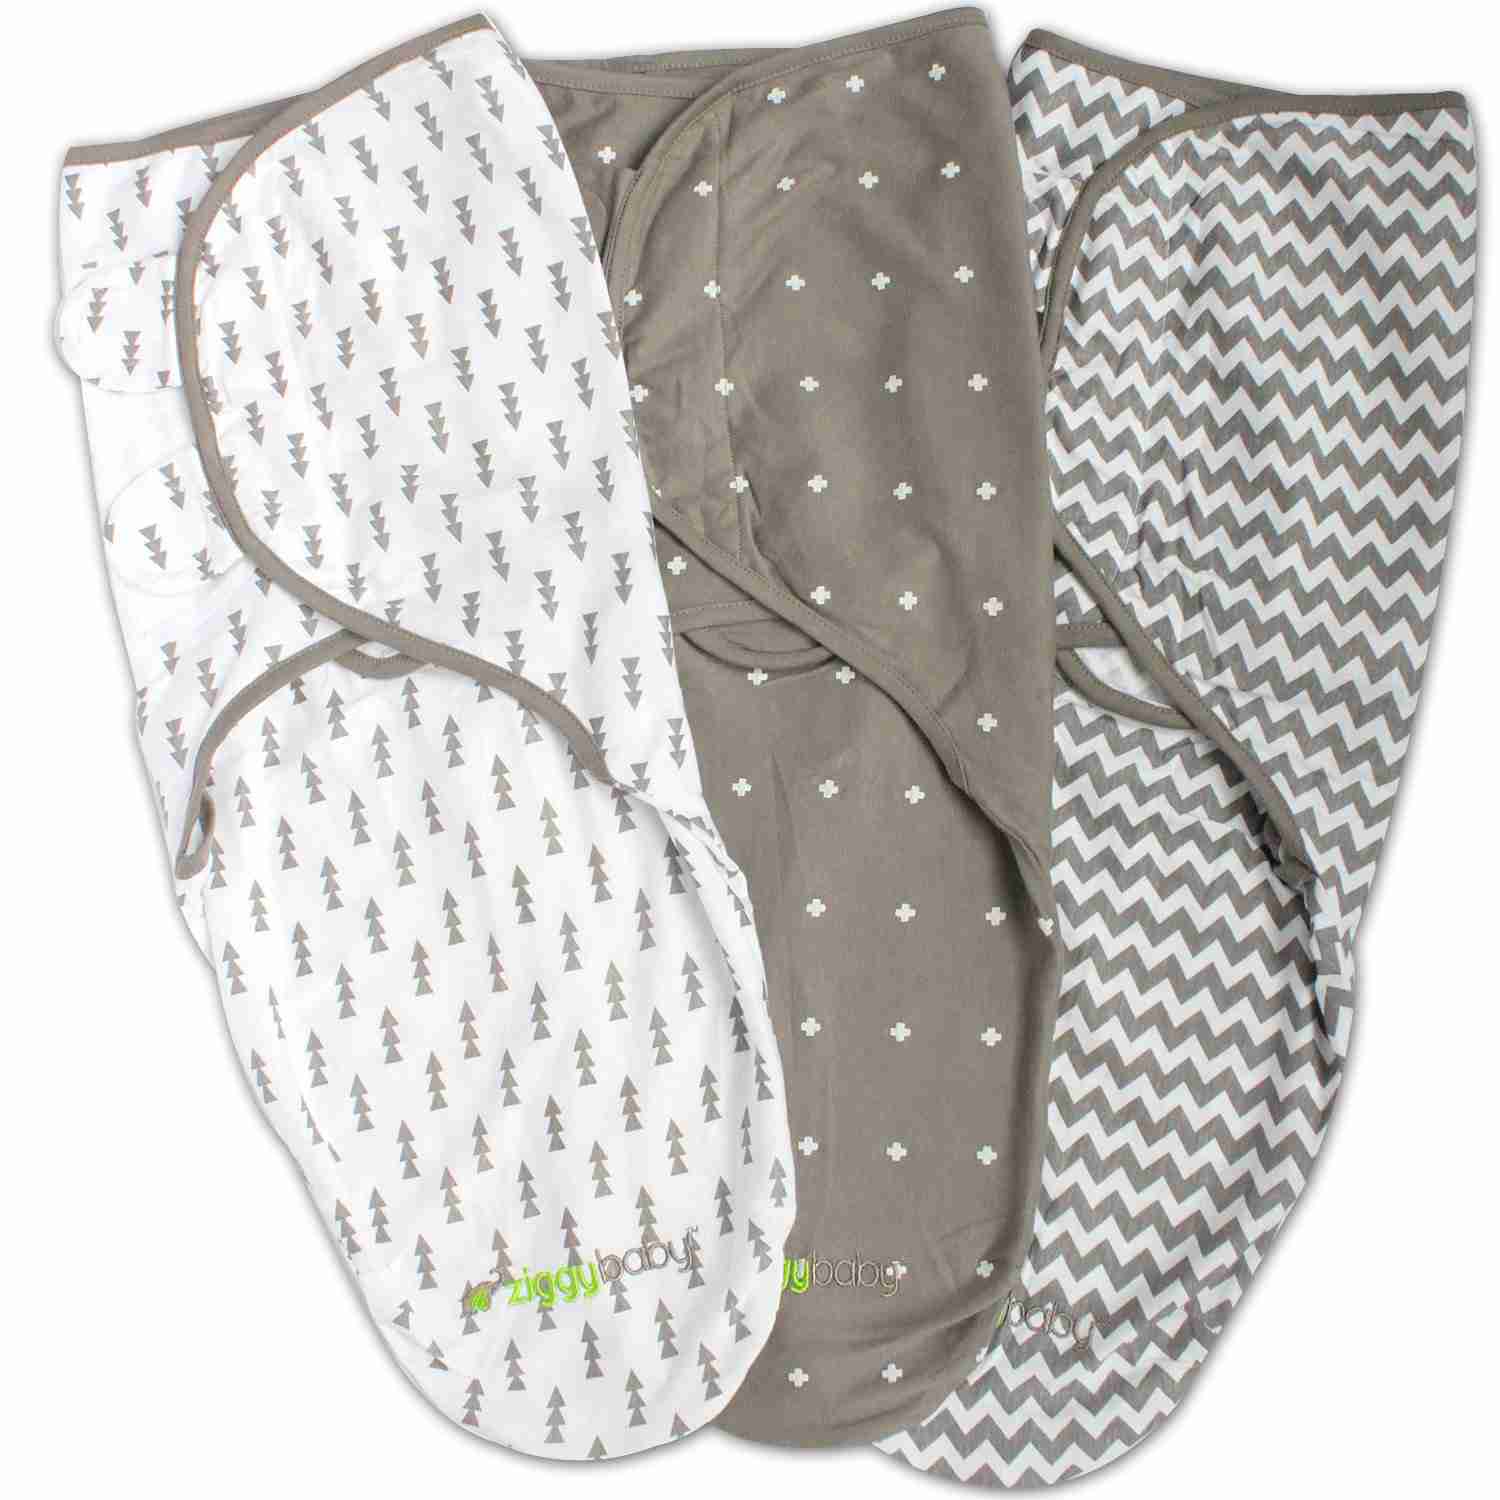 velcro-baby-swaddle with cash back rebate